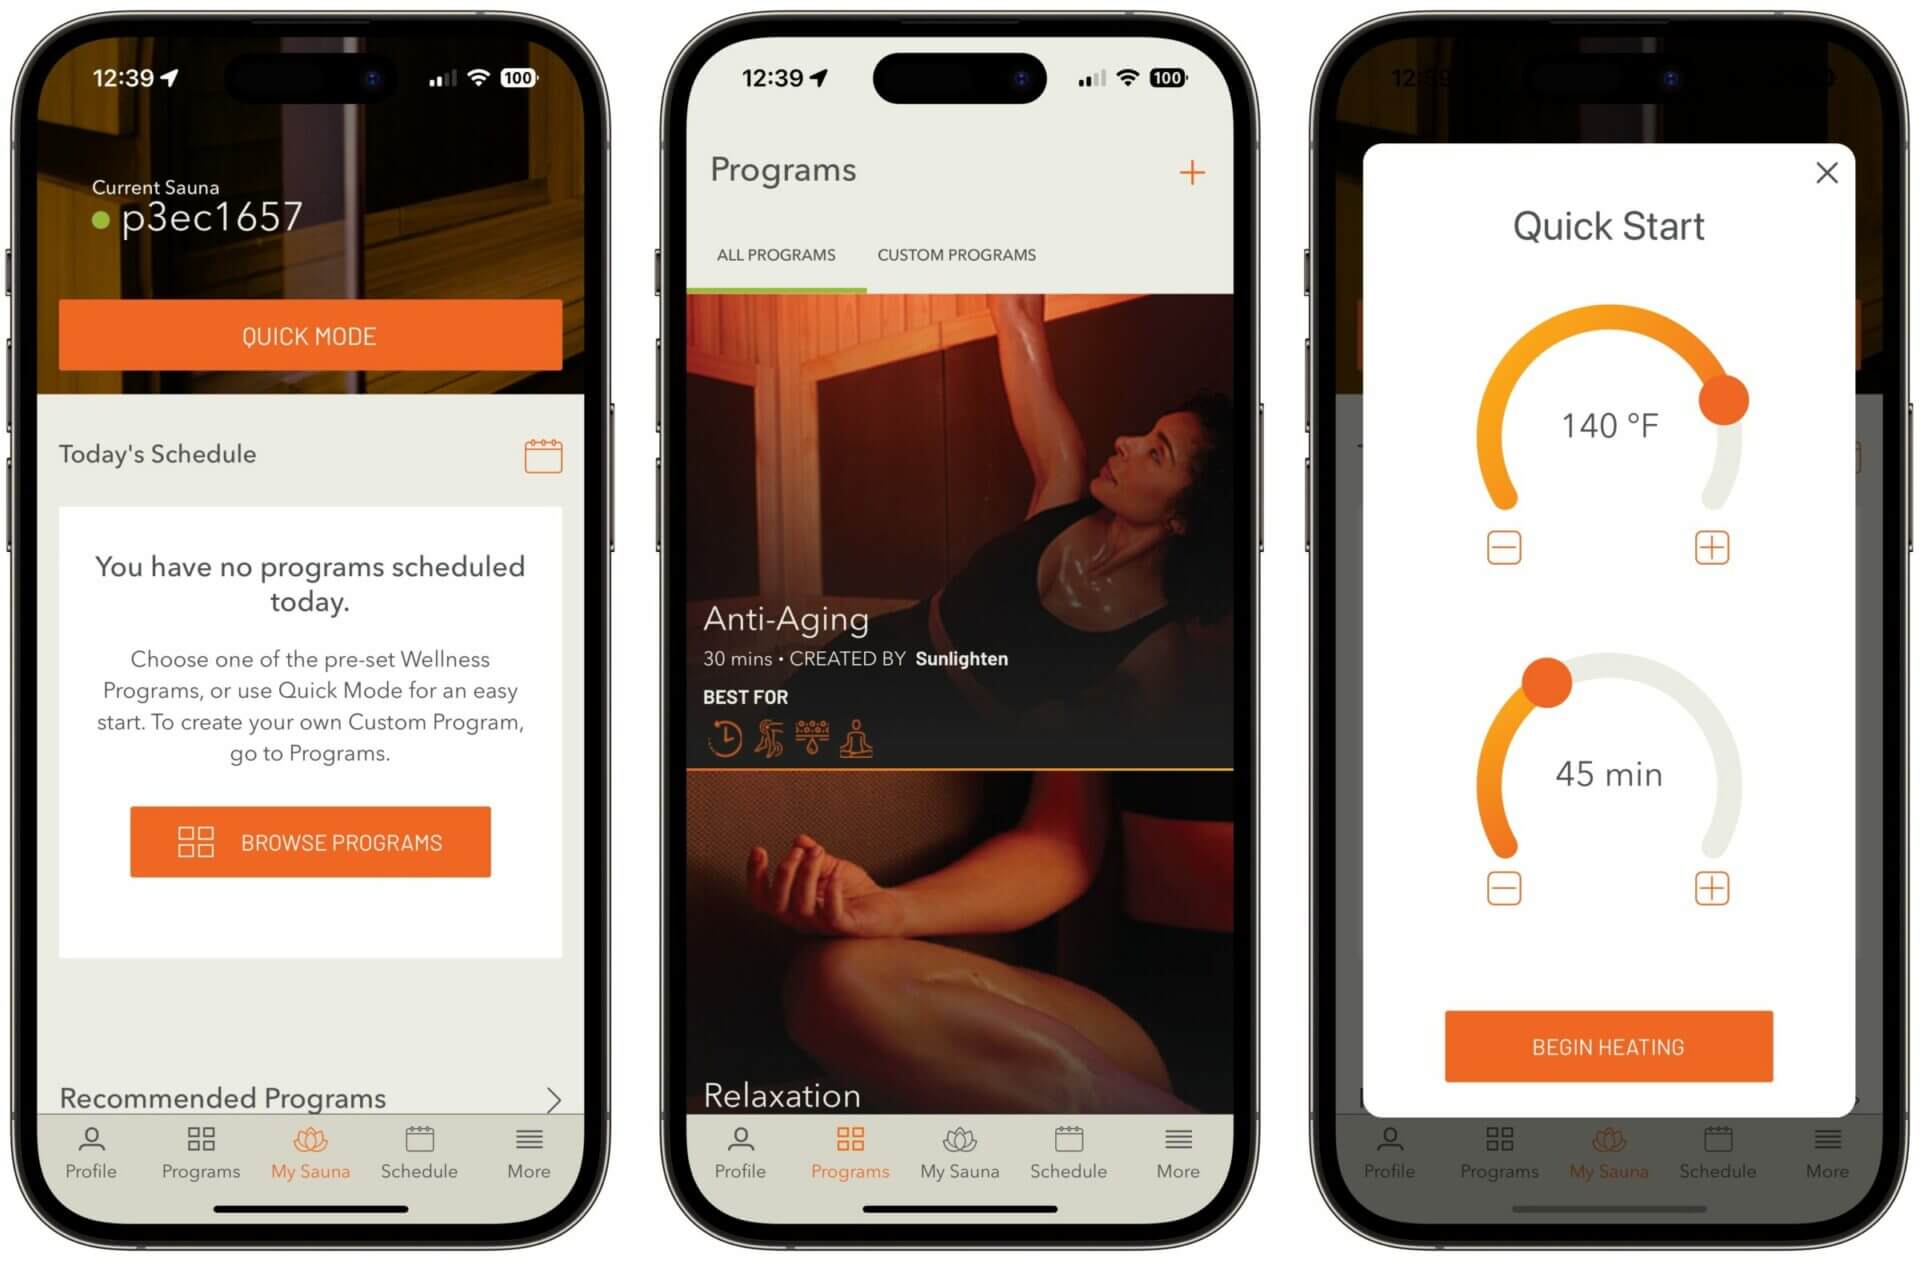 The Sunlighten mobile app makes it easy to remotely preheat the sauna or schedule a program